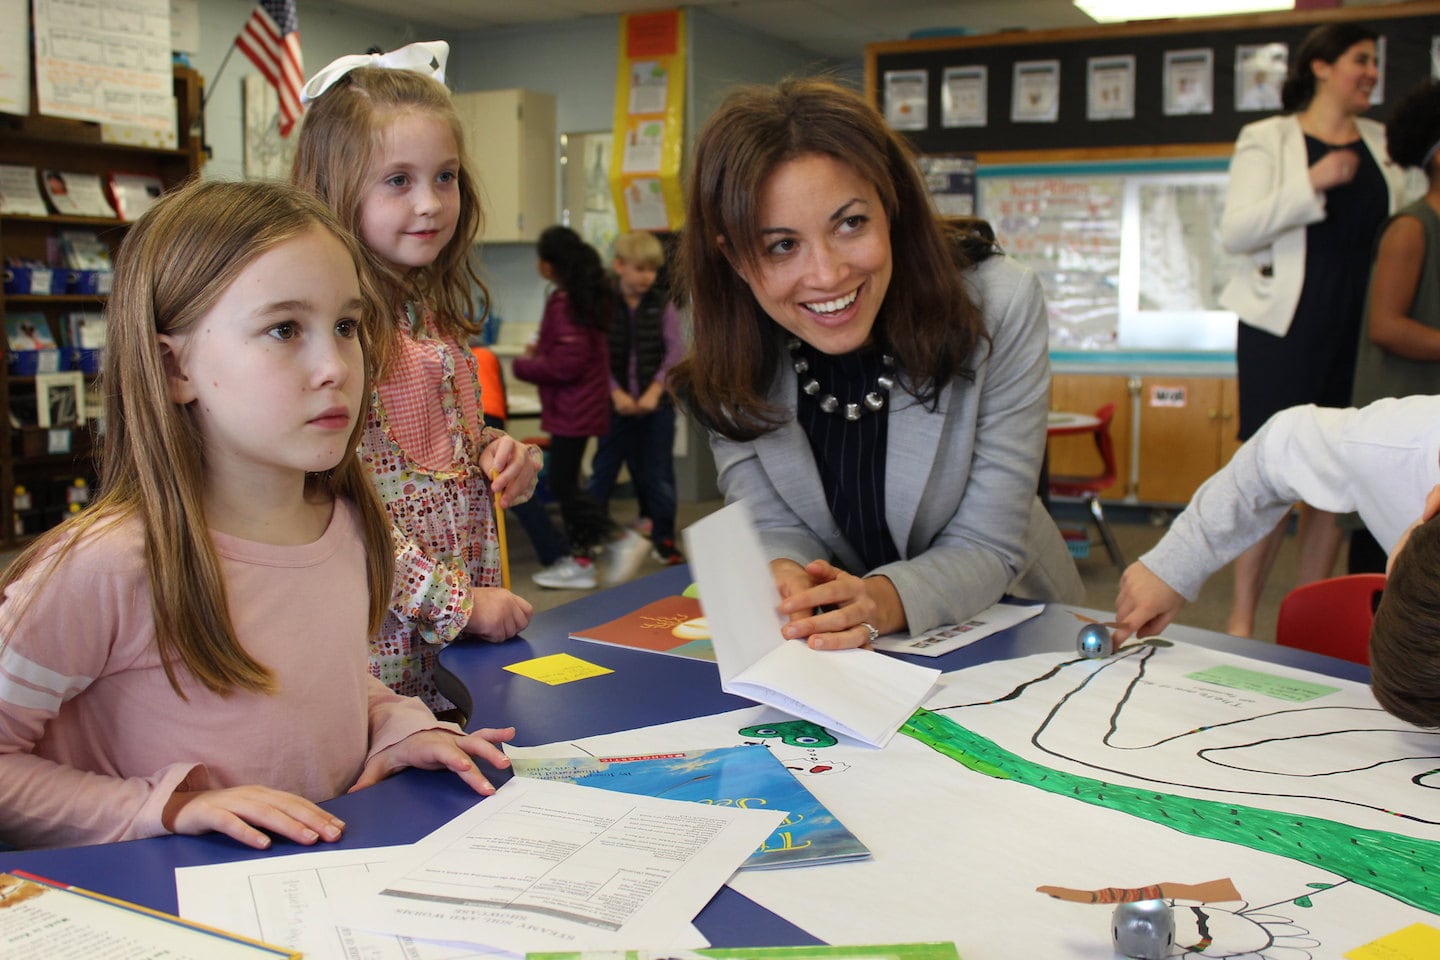 Penny Schwinn visits with students at a school in Rutherford County in February, soon after becoming education commissioner in Tennessee. (Photo courtesy of Tennessee Department of Education)